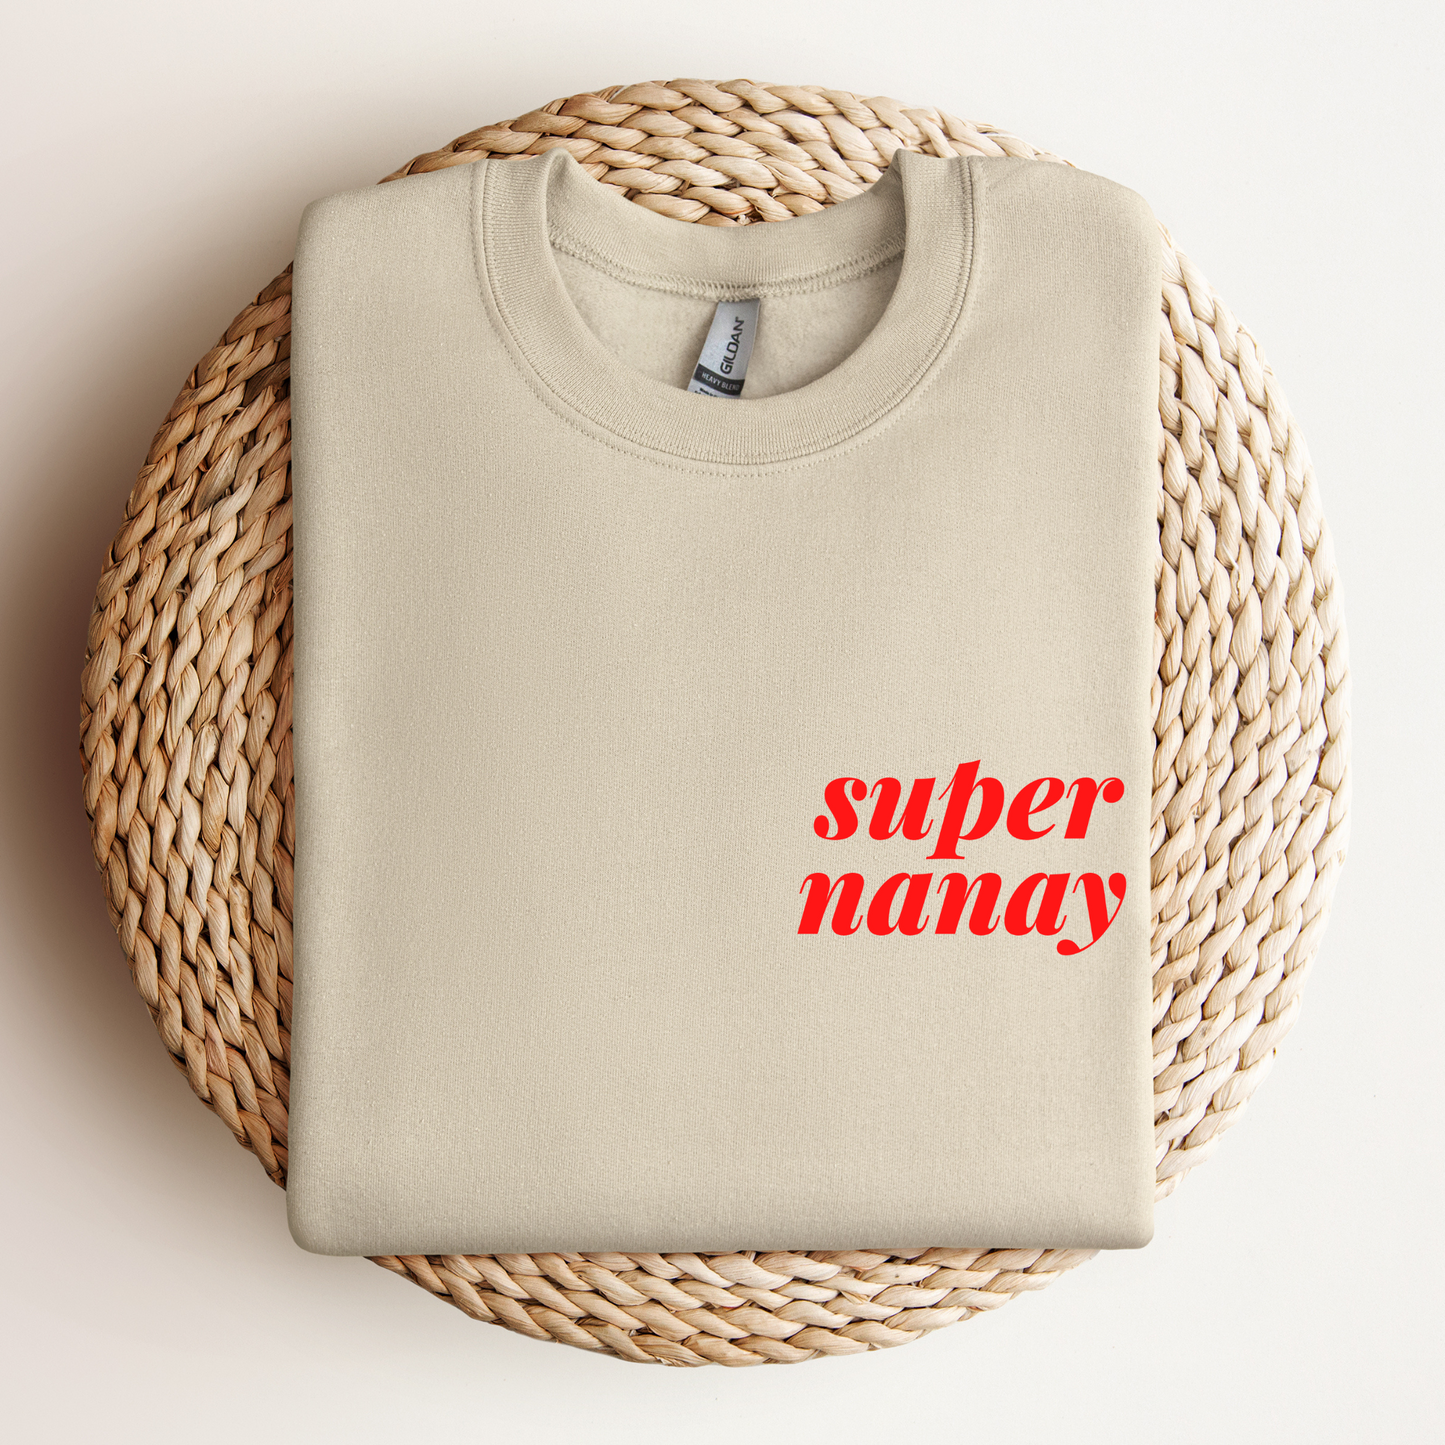 Filipino Sweatshirt Crew Neck Super Nanay Best Mom Embroidered Mother's Day Gift